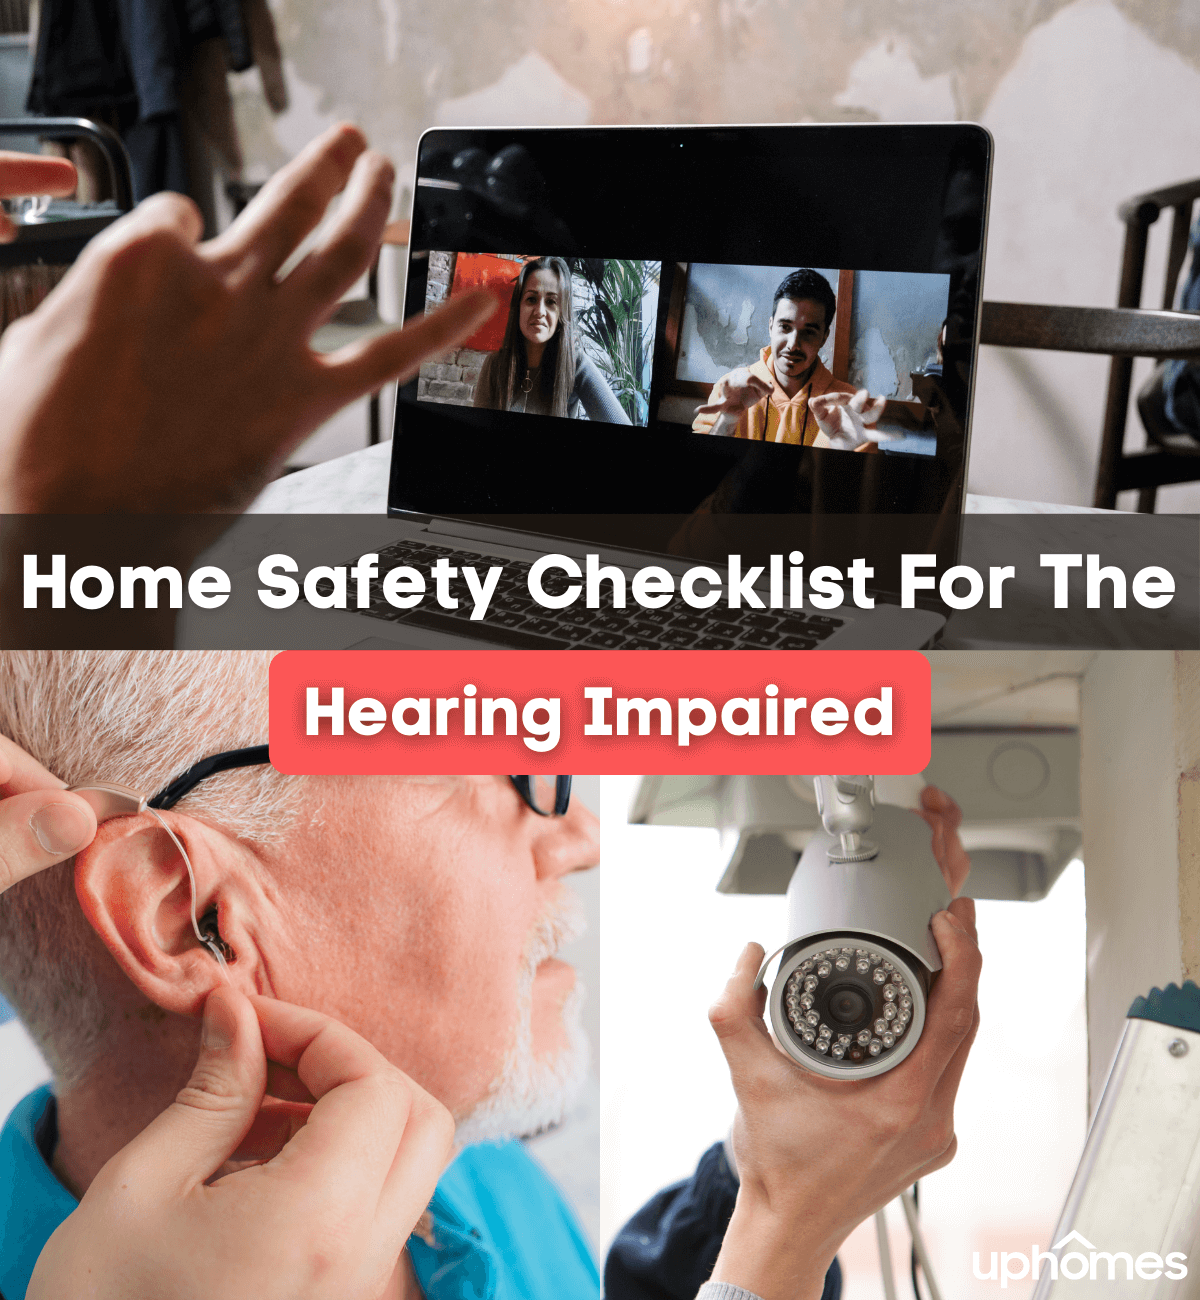 Deaf or Hearing Loss Home Safety Checklist - How to live life at home safely with hearing impairment